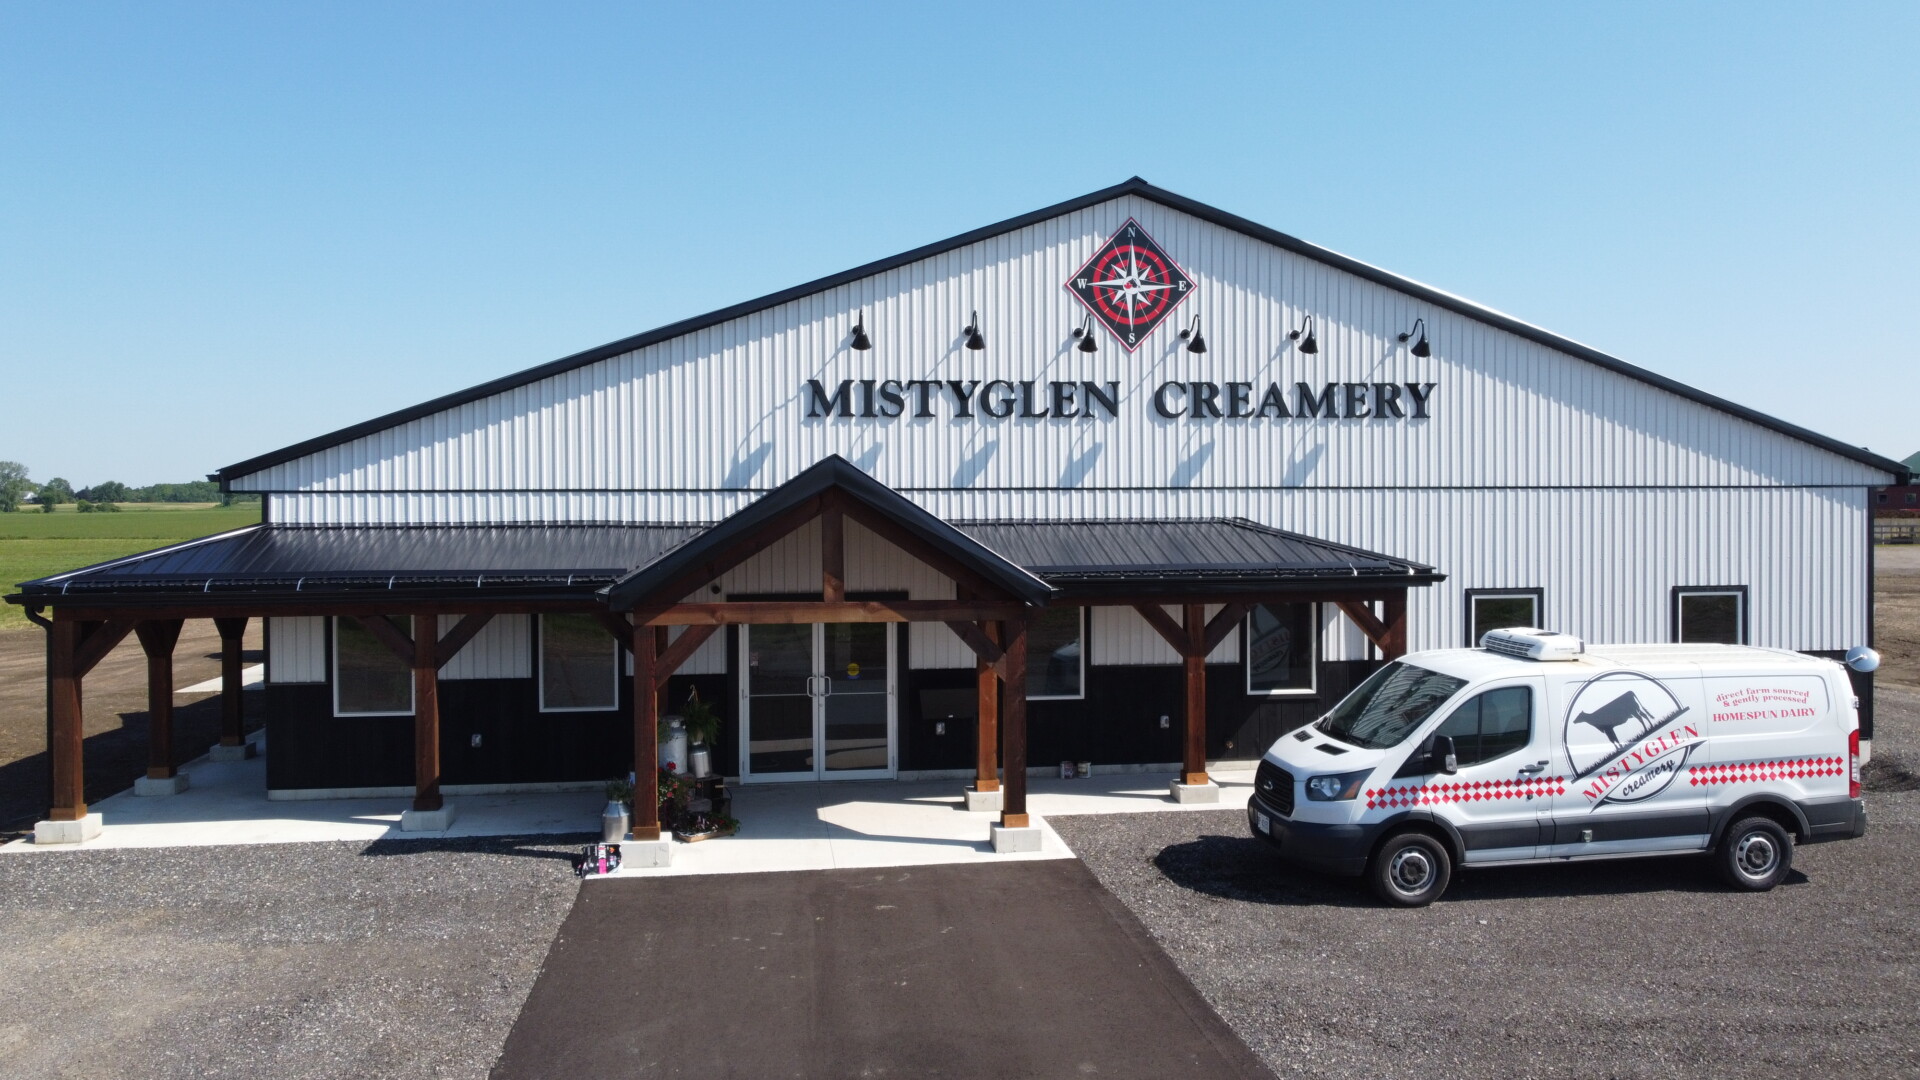 Mistyglen Creamery featuring local milk, yogurt and cheese curds as well as numerous local products from various other local businesses.